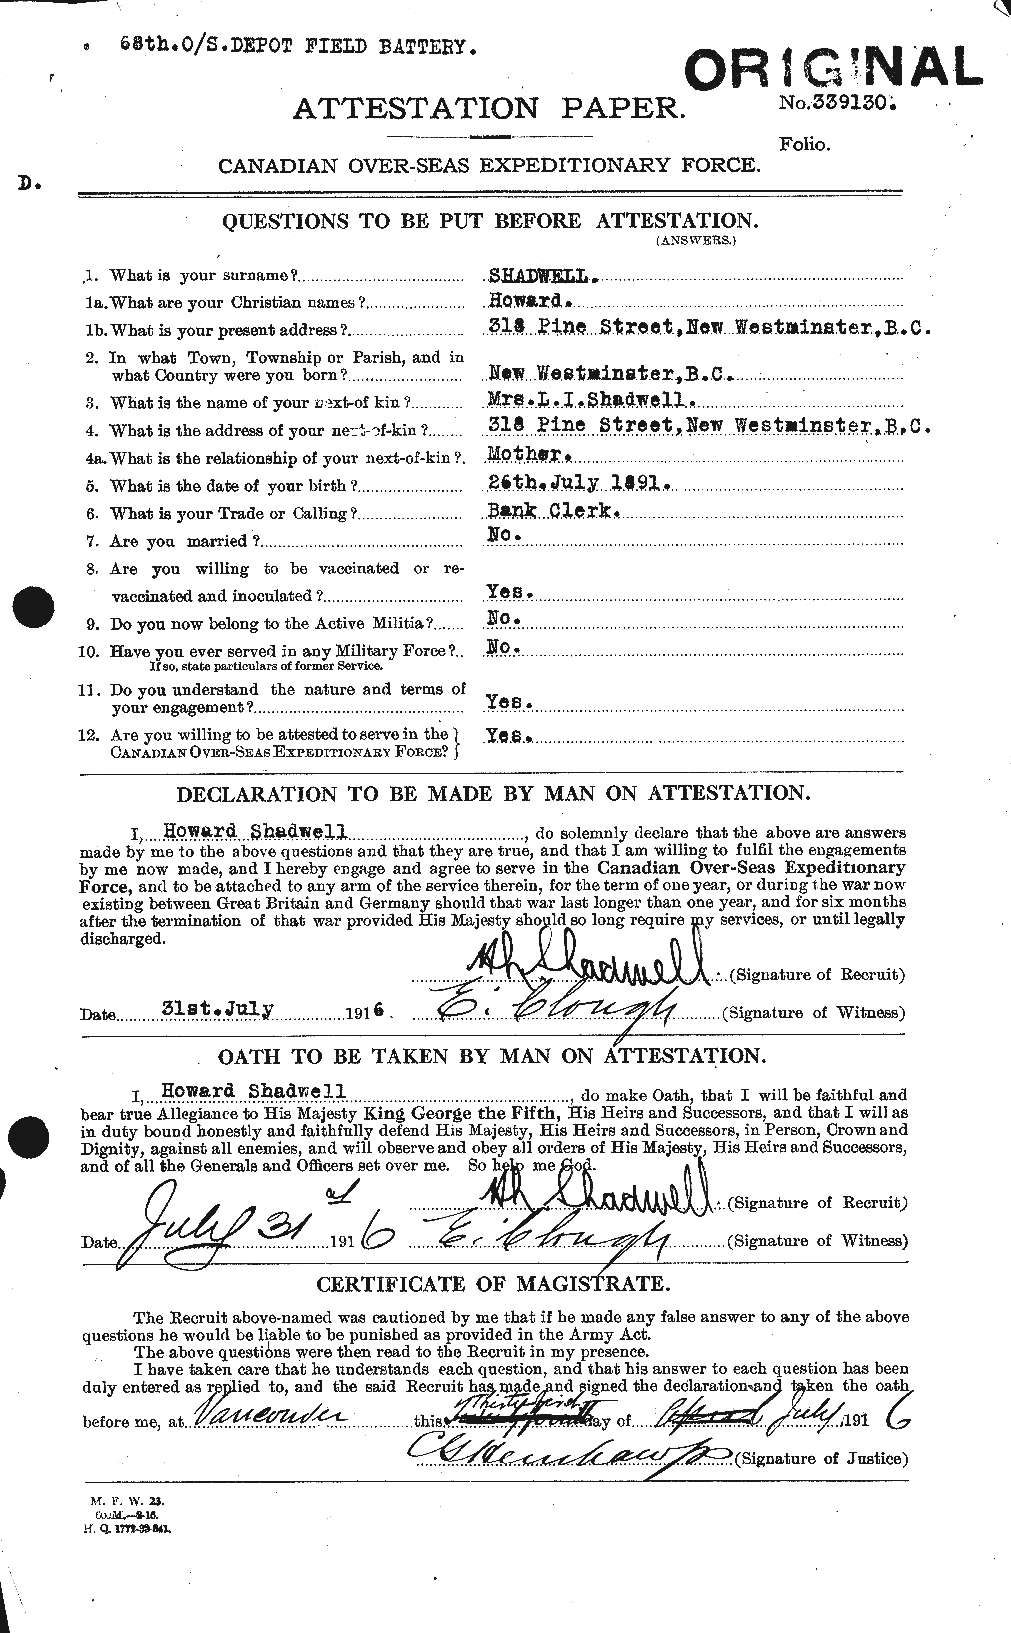 Personnel Records of the First World War - CEF 087719a